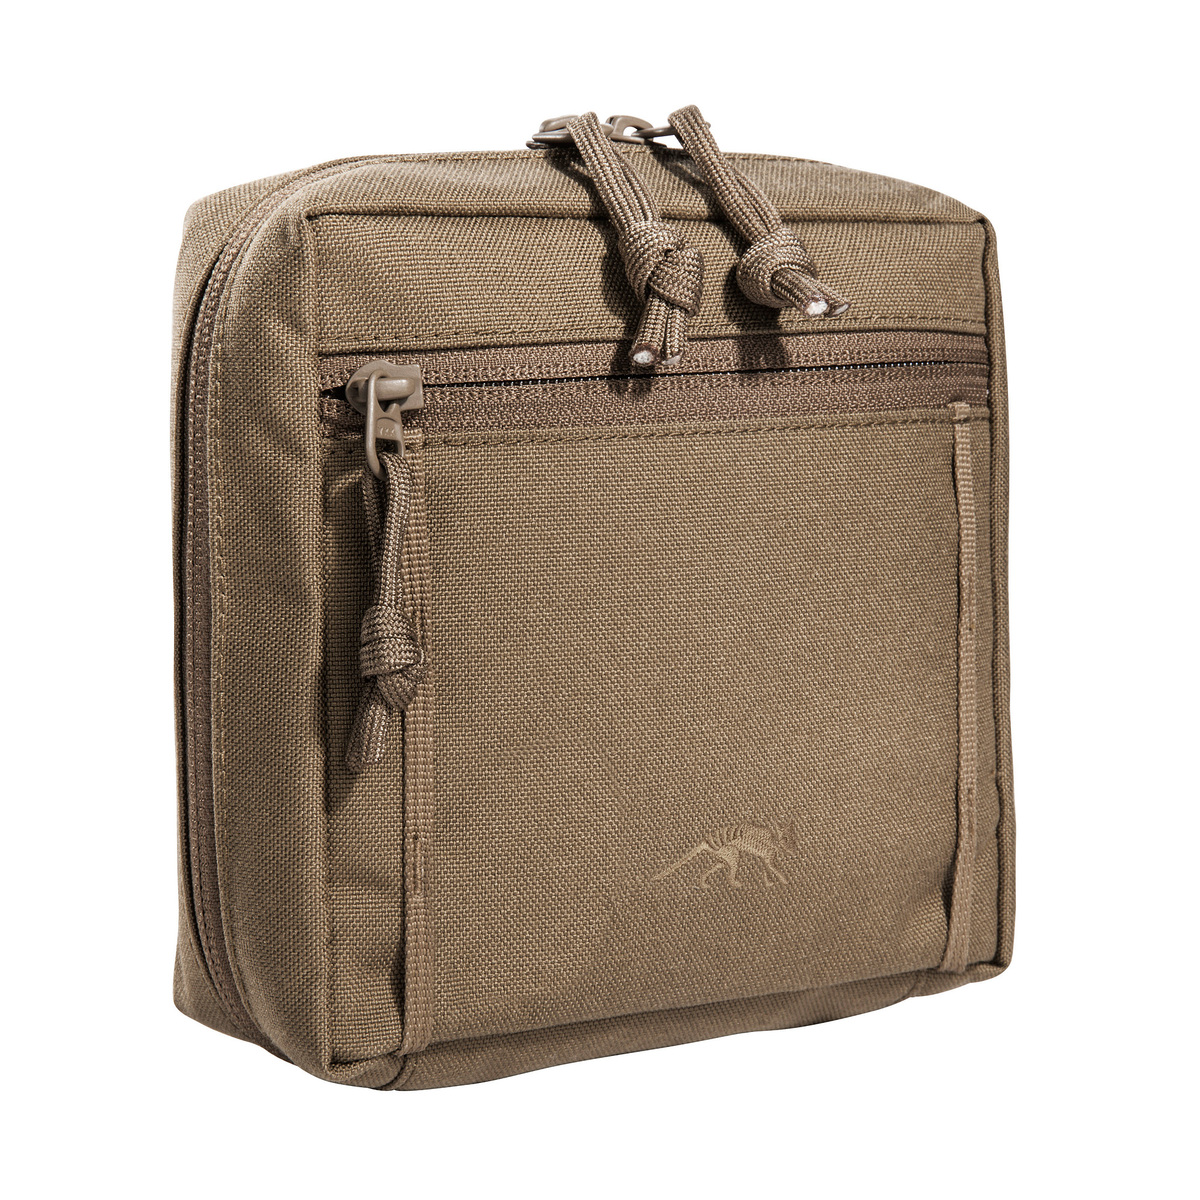 Tac Pouch 5.1 Coyote brown